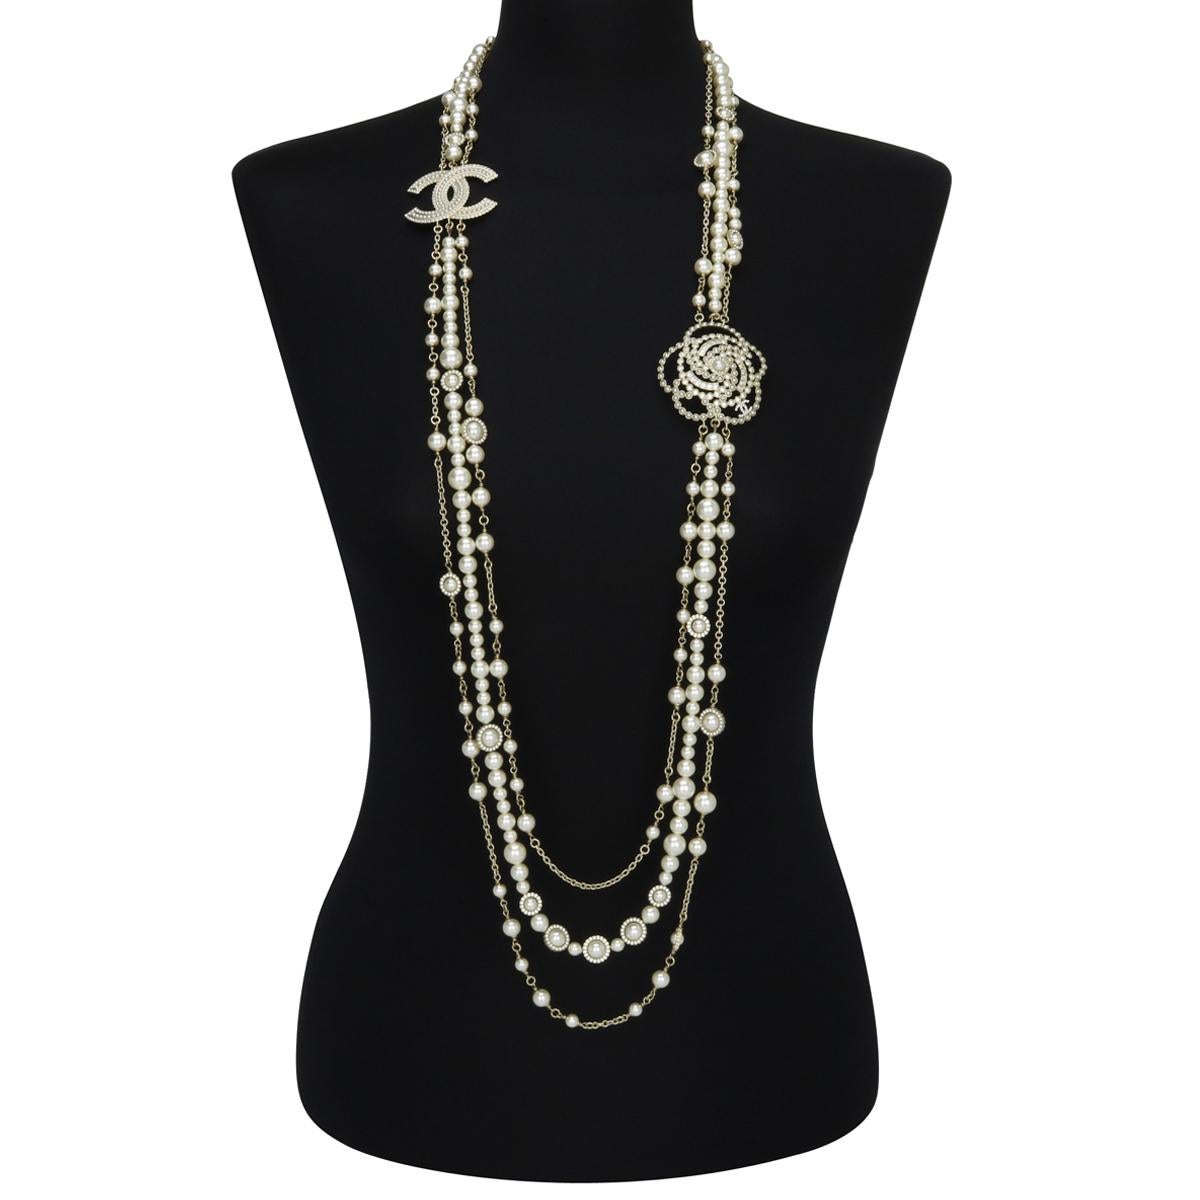 CHANEL CC Pearl Crystal Camellia Gold-Tone Long Necklace 2019 (B19 B).

This stunning long necklace is in immaculate condition.

This three-strand necklace is made of exquisite various-sized baroque pearl crystal beads. With the large interlocking